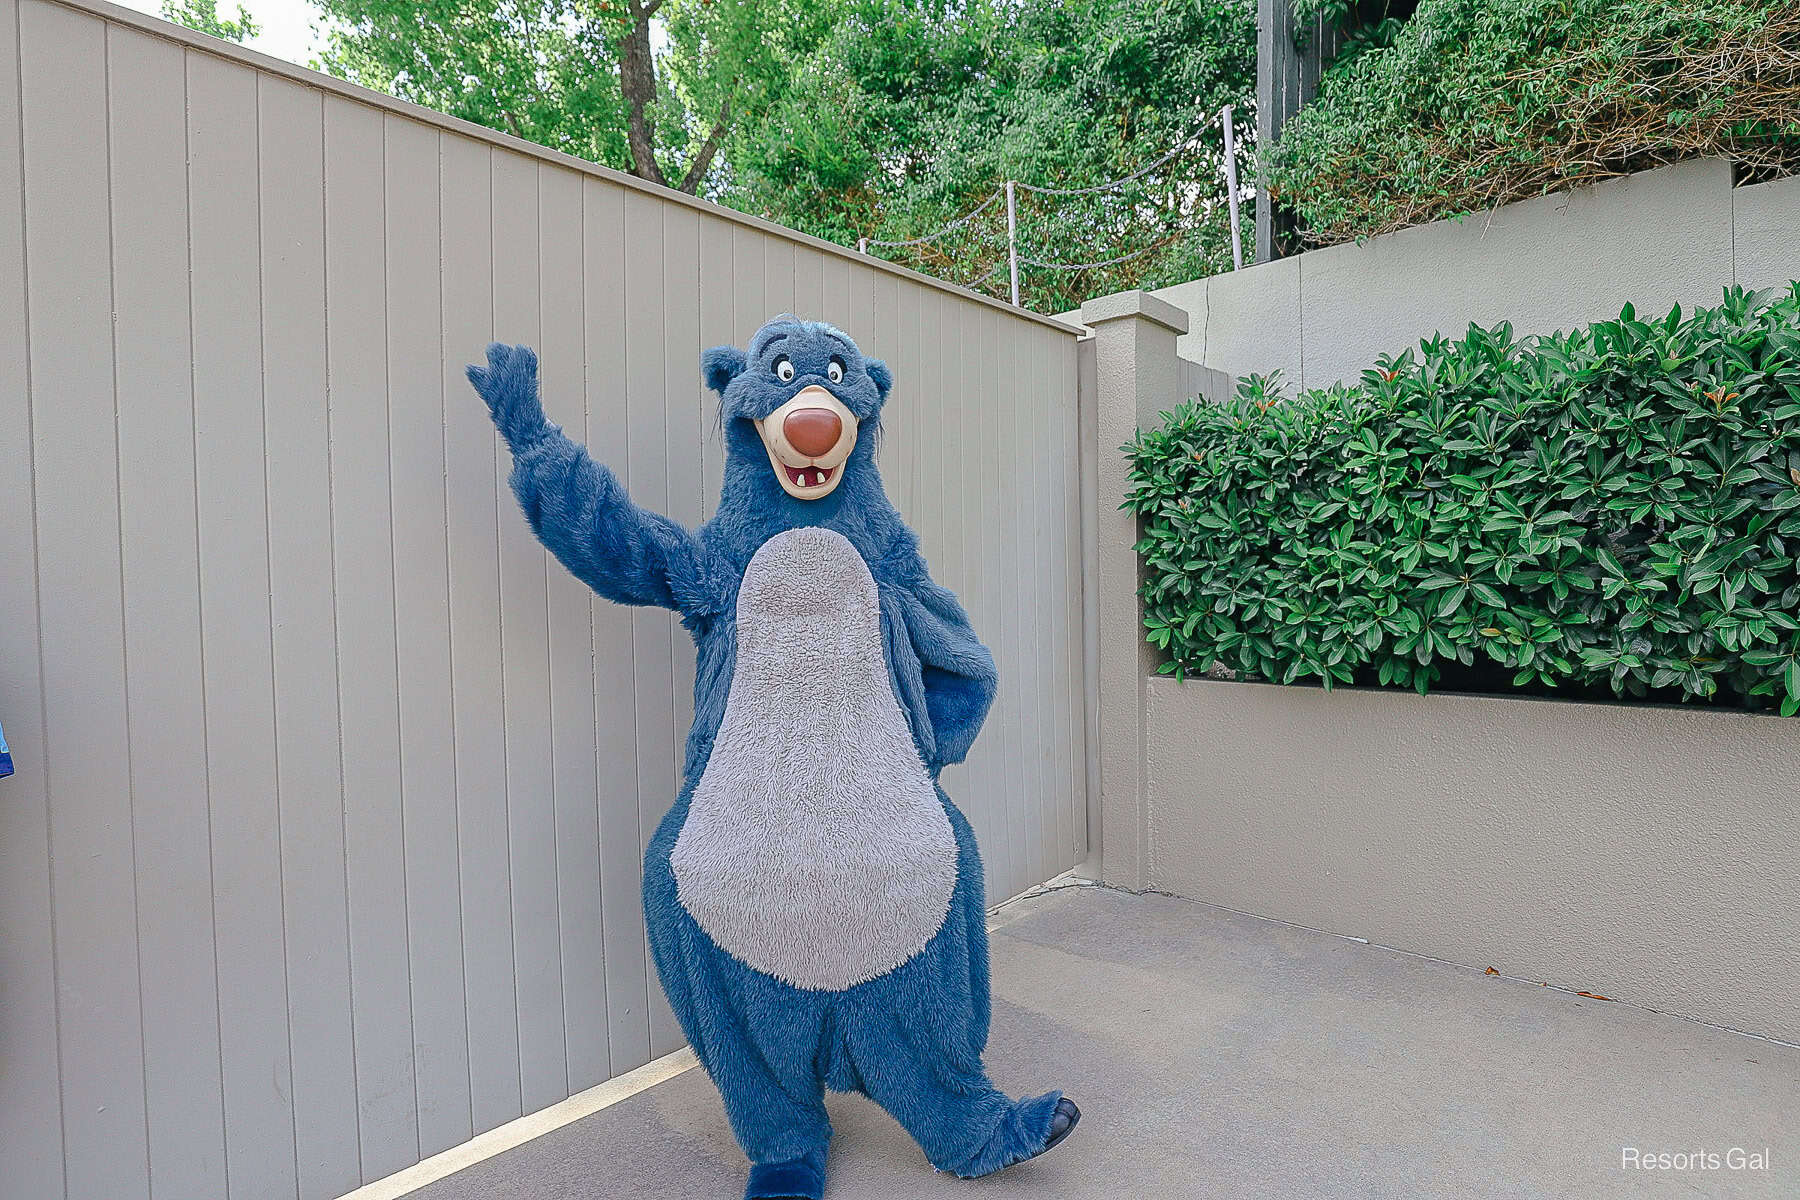 Baloo from The Jungle Book meeting as a surprise outside the entrance of Disney's Hollywood Studios 